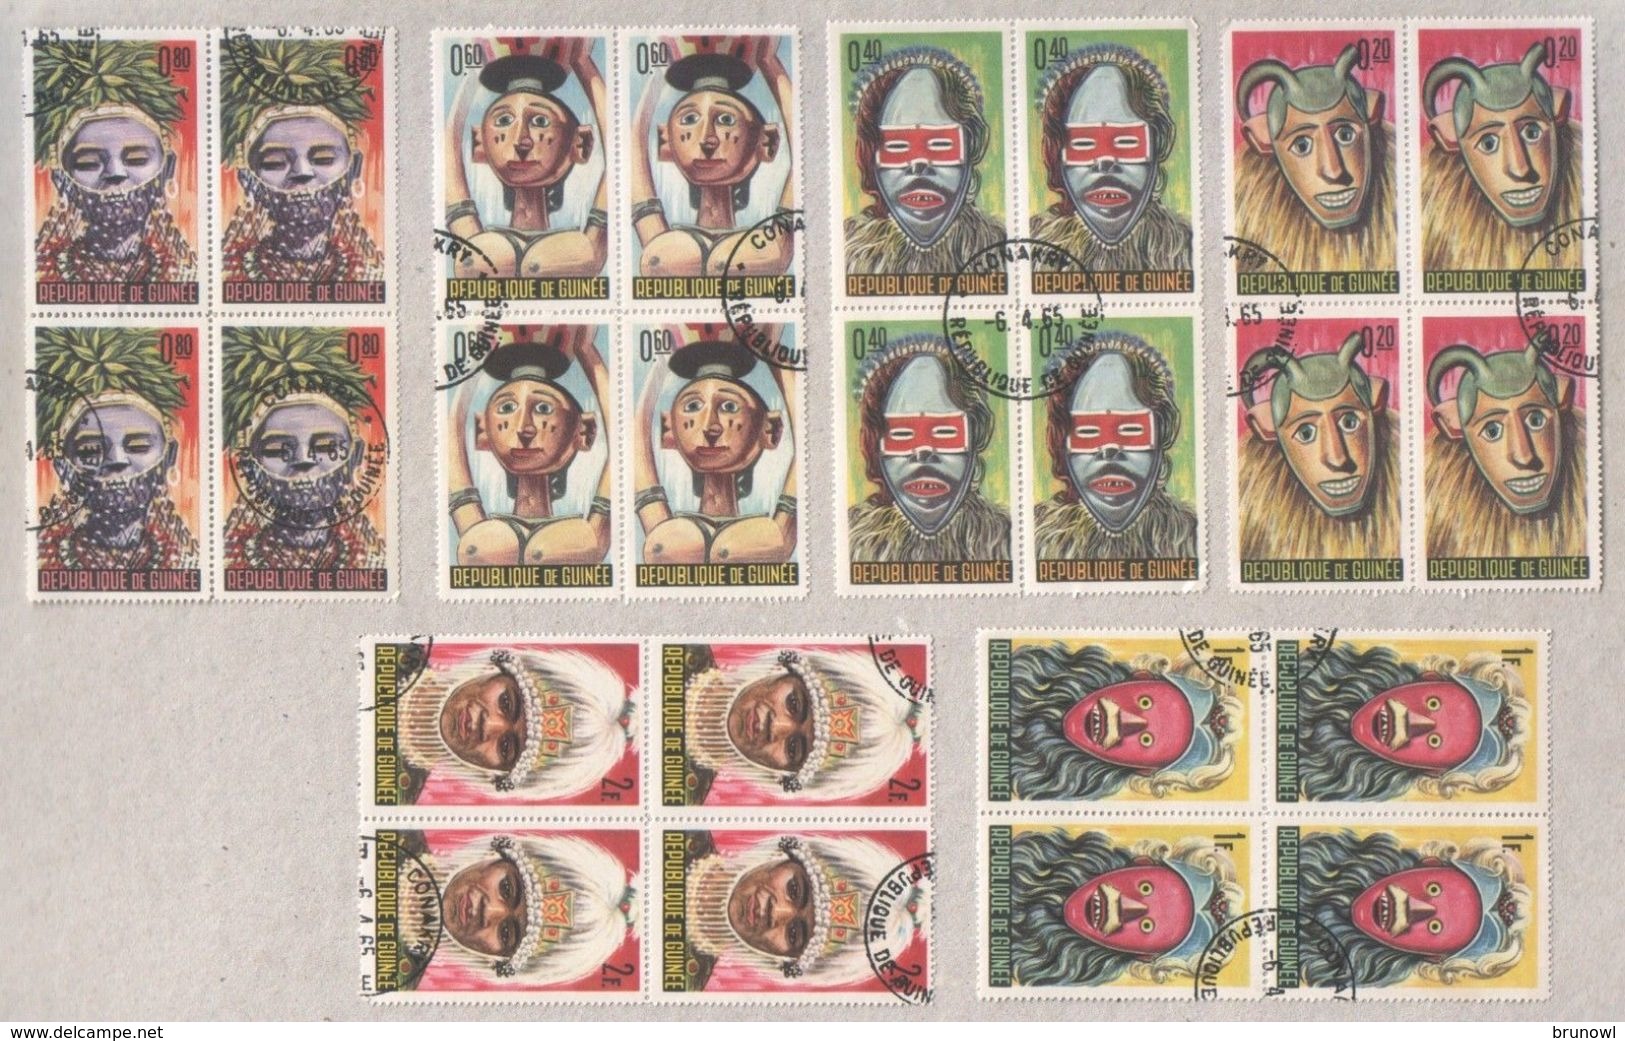 Guinea 1965 Traditional Masks Set of Stamps in CTO Blocks